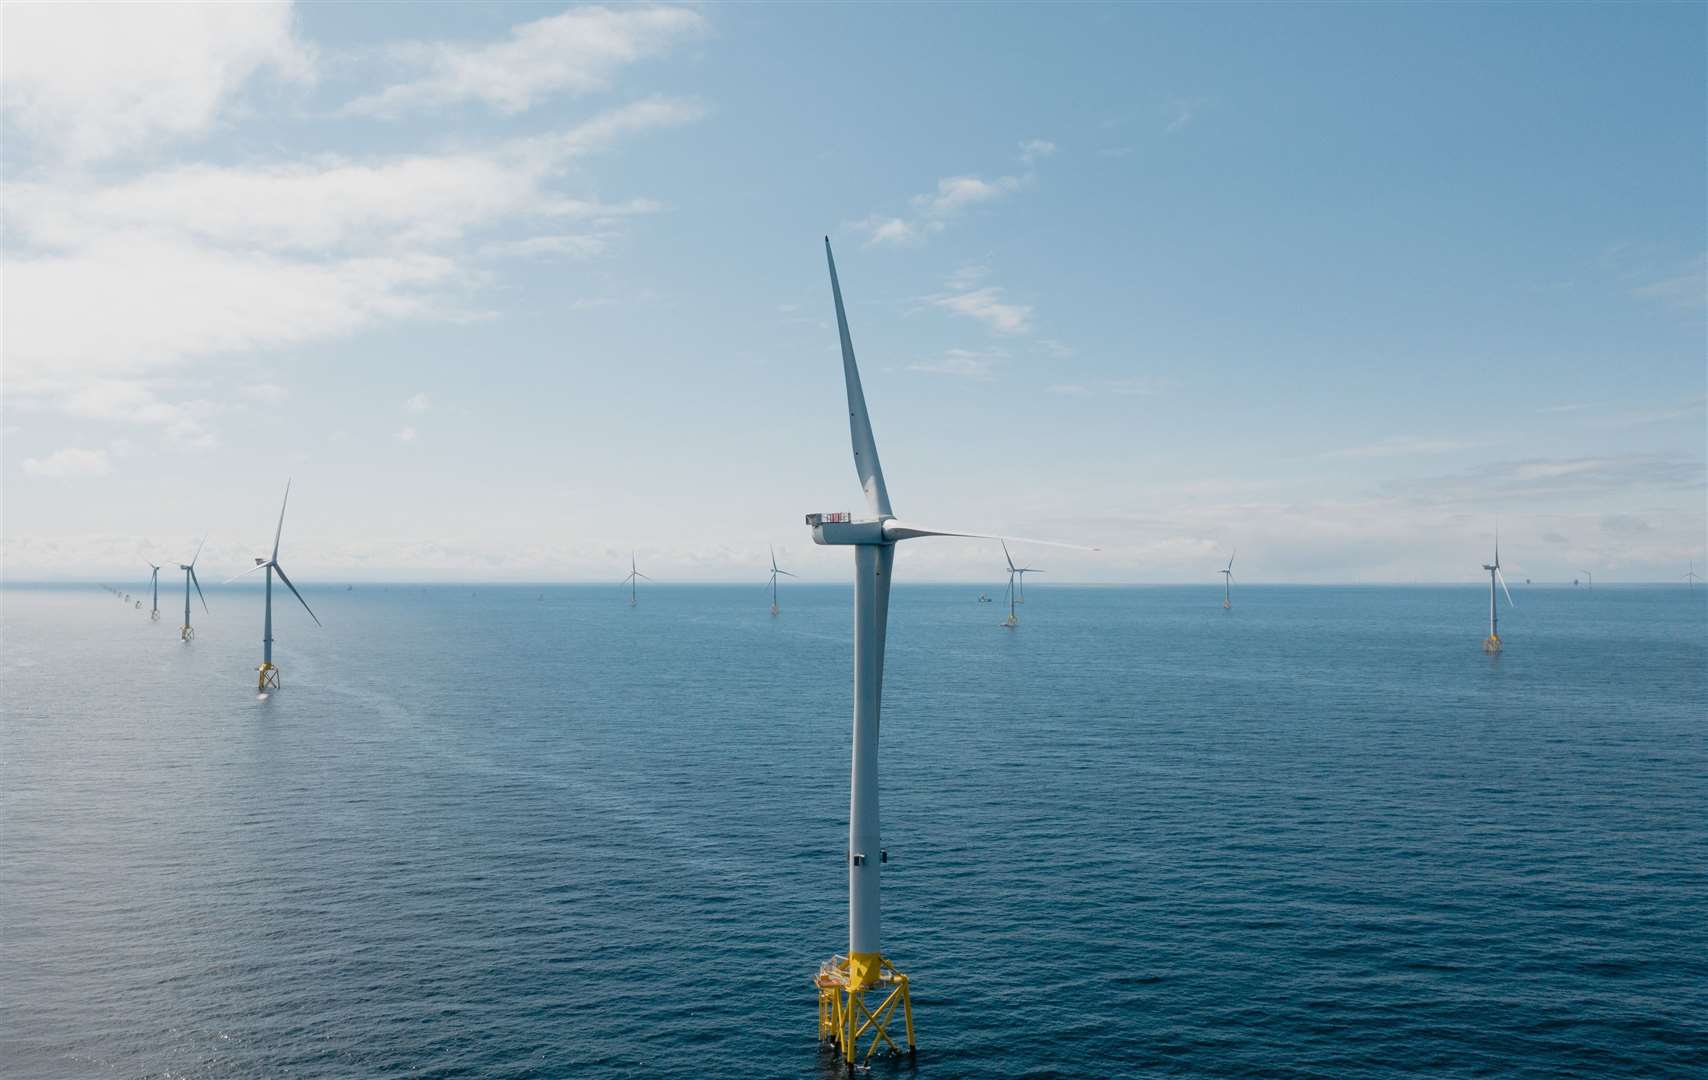 Ocean Winds has bee awarded the oportunity to develop a new wind fark in the Moray Firth.